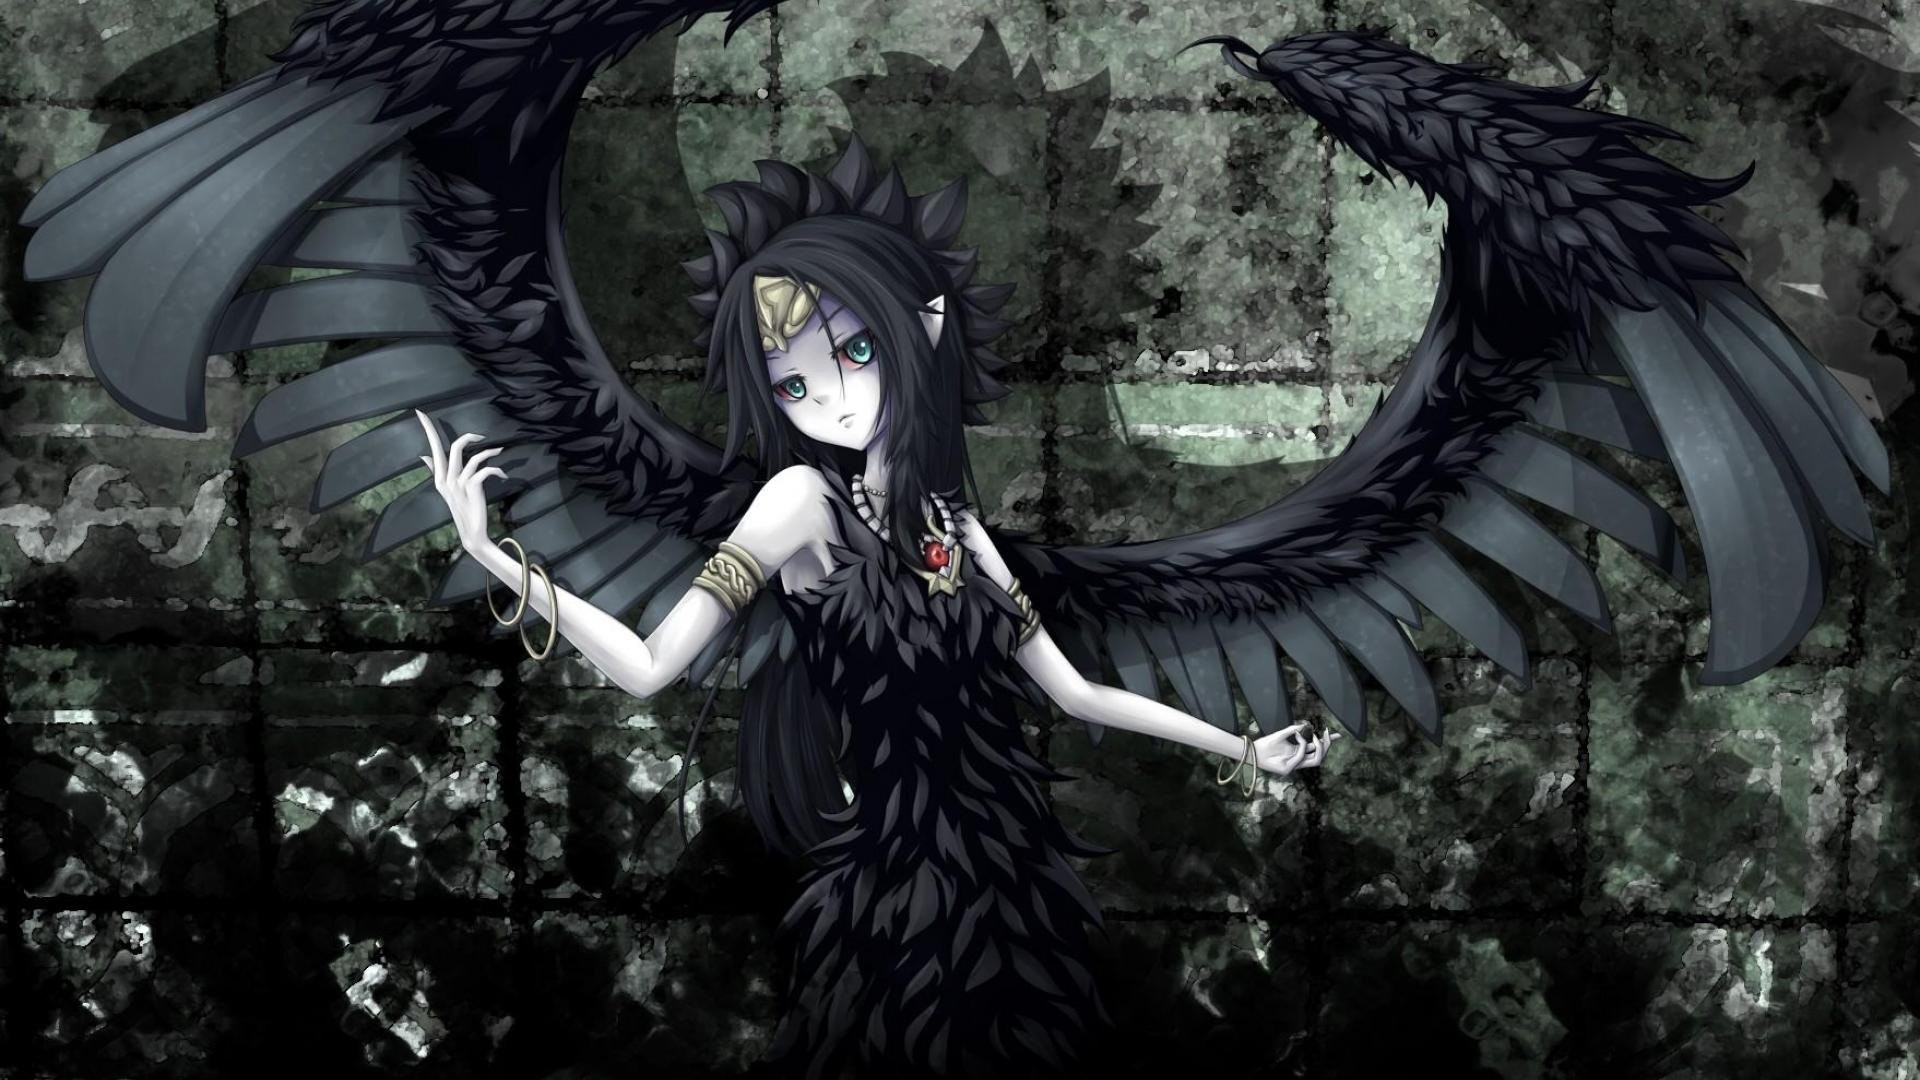 1920x1080 ... dark anime angels images anime dark angels wallpaper and .